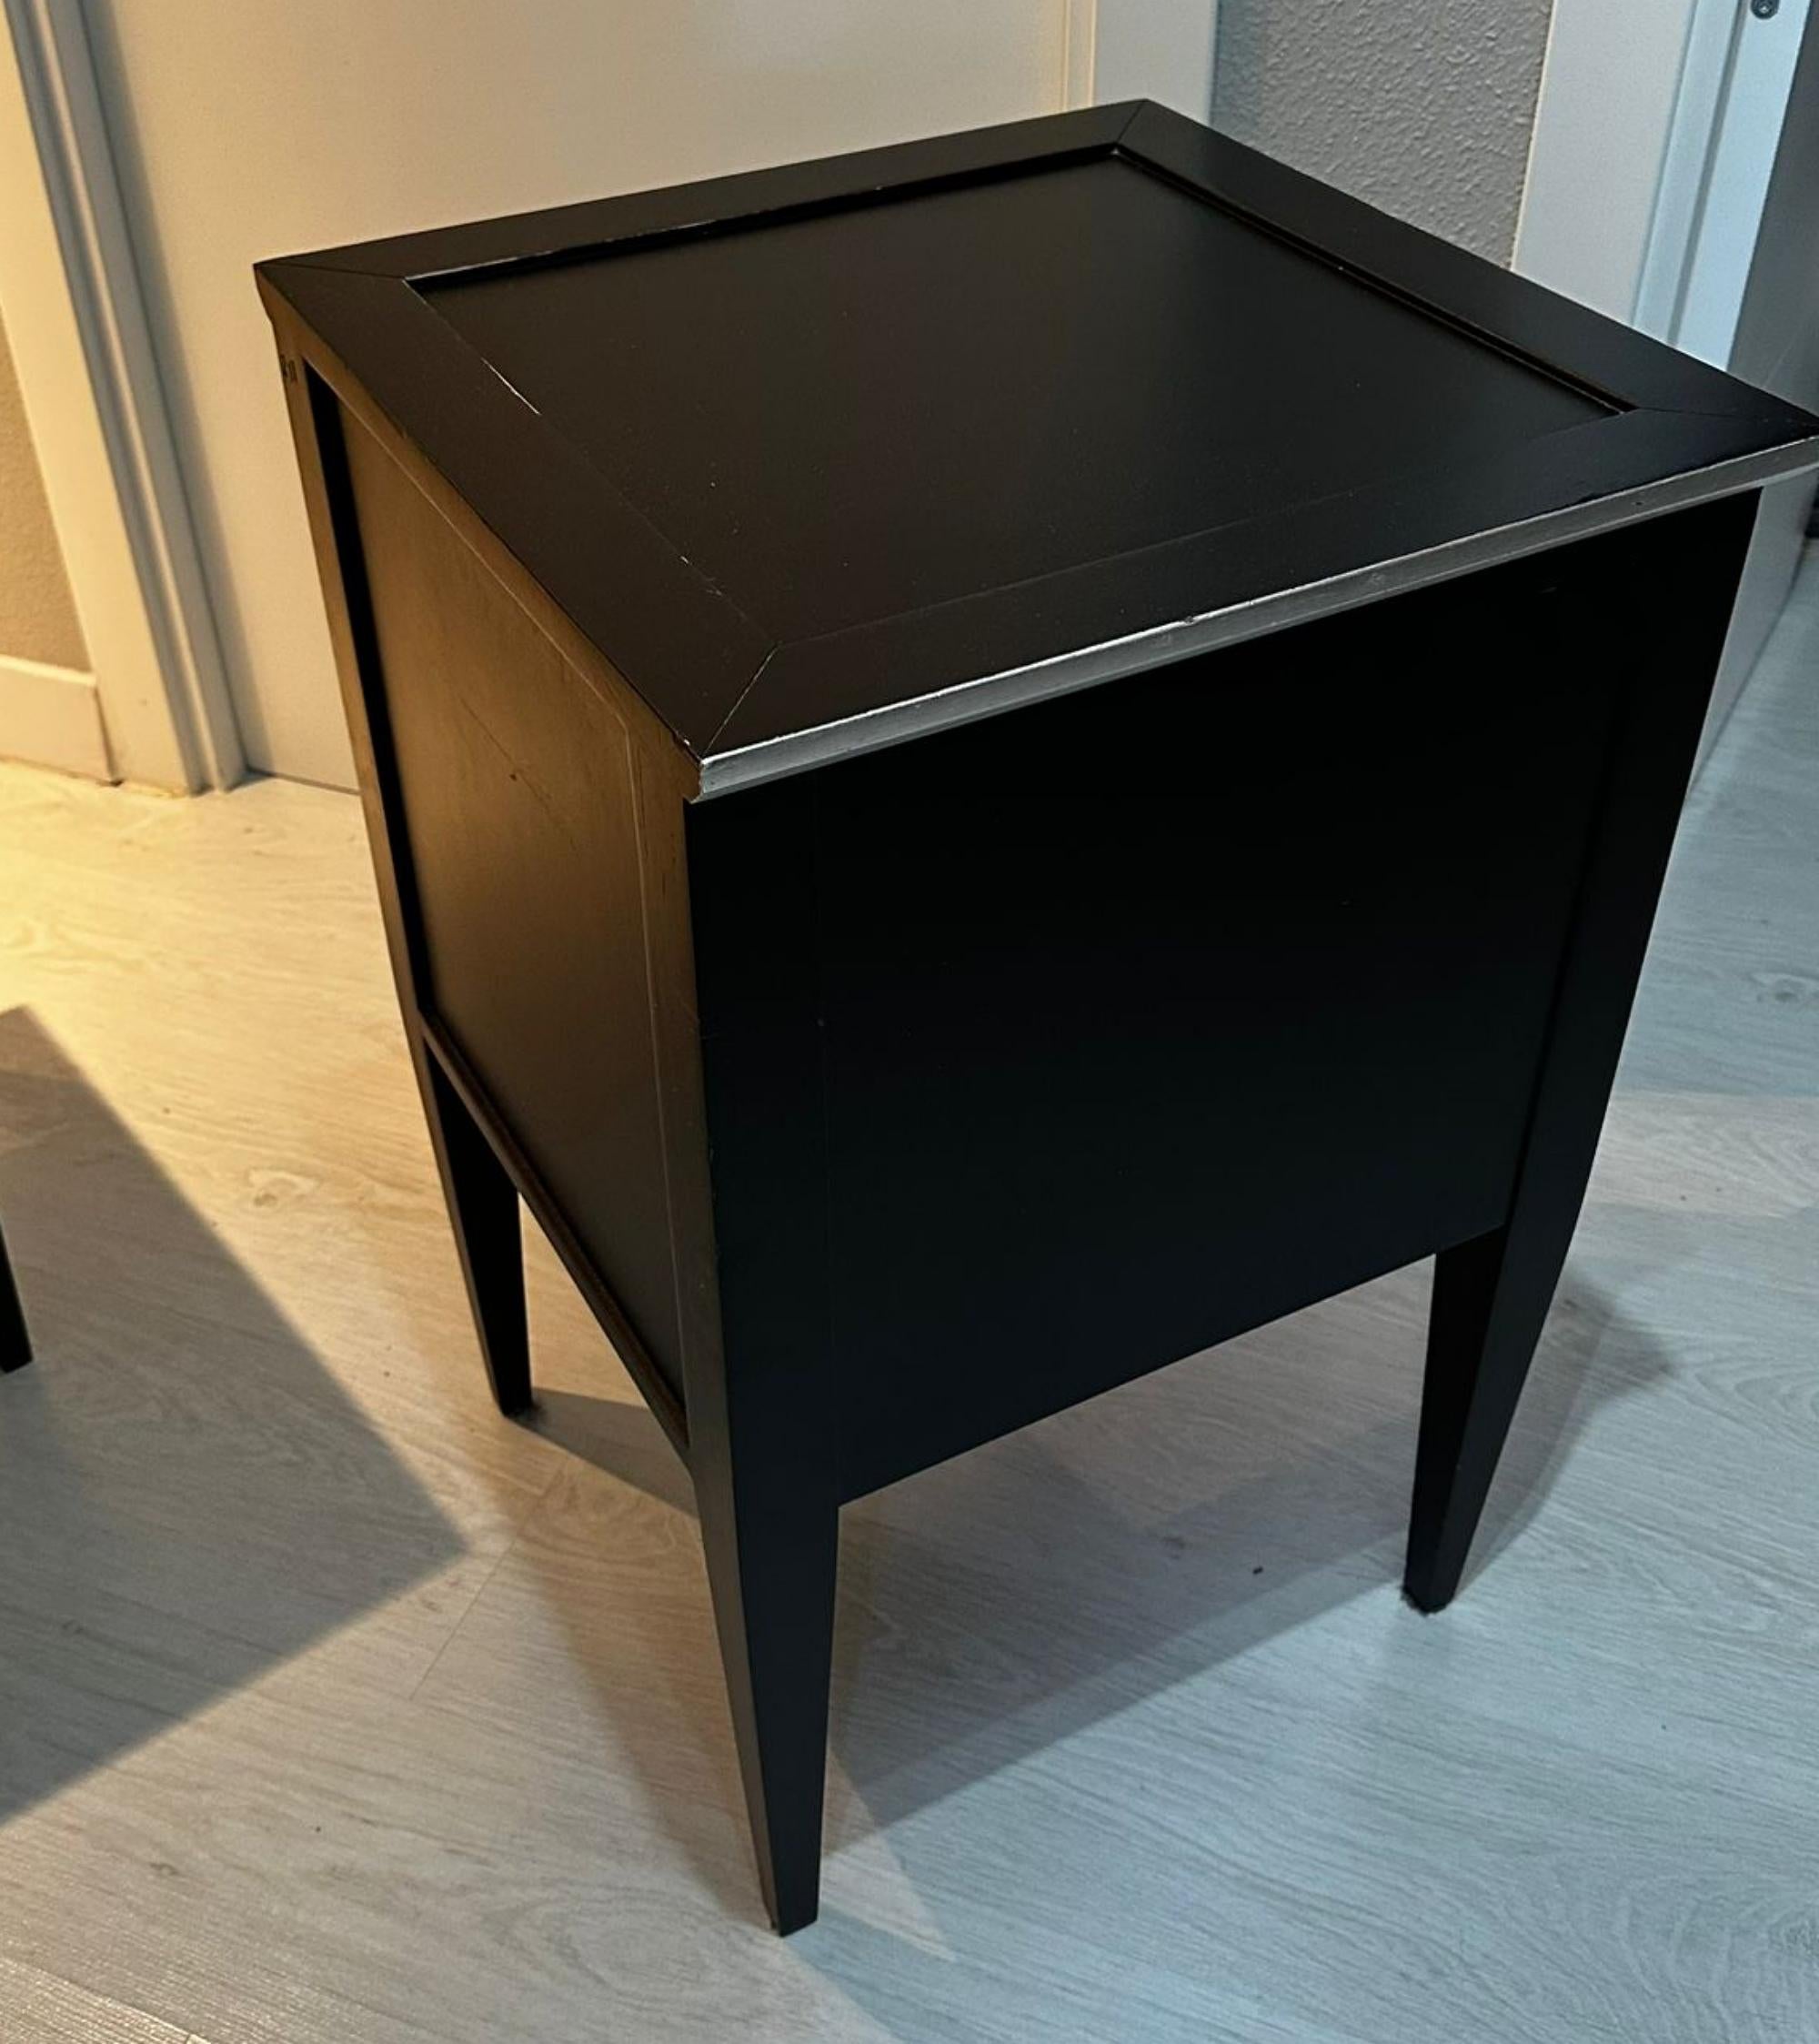 Pair of 20th century Italian bedside tables.
in black wood
Measures: 45cm x 45cm
H: 69cm
Good condition.